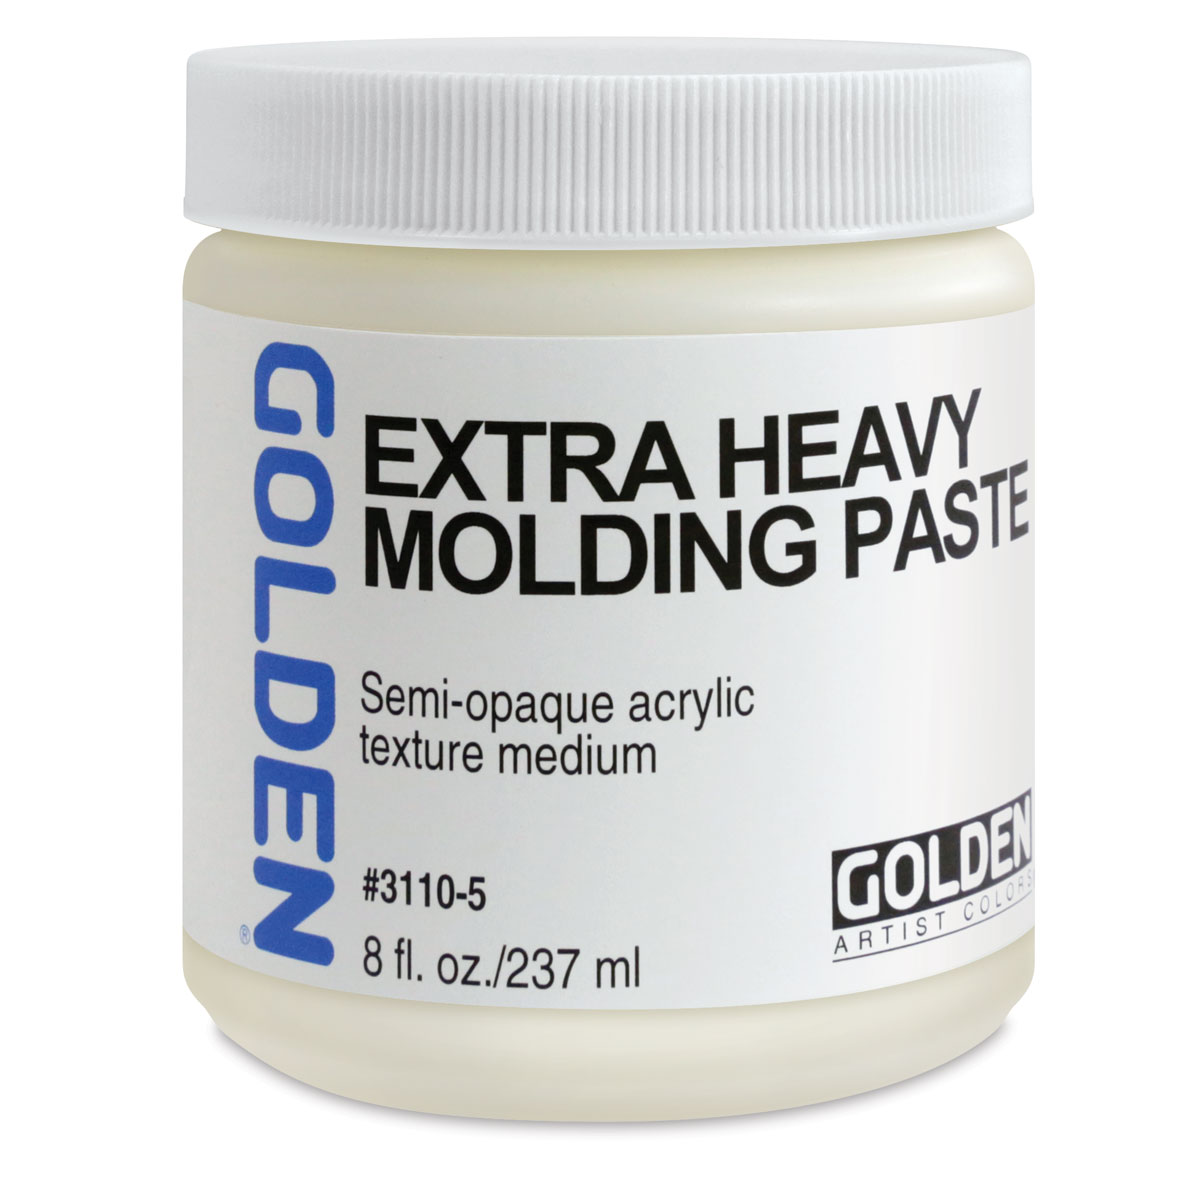  Golden Artist Color Hard Molding Paste for Acrylic Paint,  Modeling Paste for Acrylic Paint, Opaque Acrylic Texture Paste, with  Lumintrail Sticky Notes : Arts, Crafts & Sewing